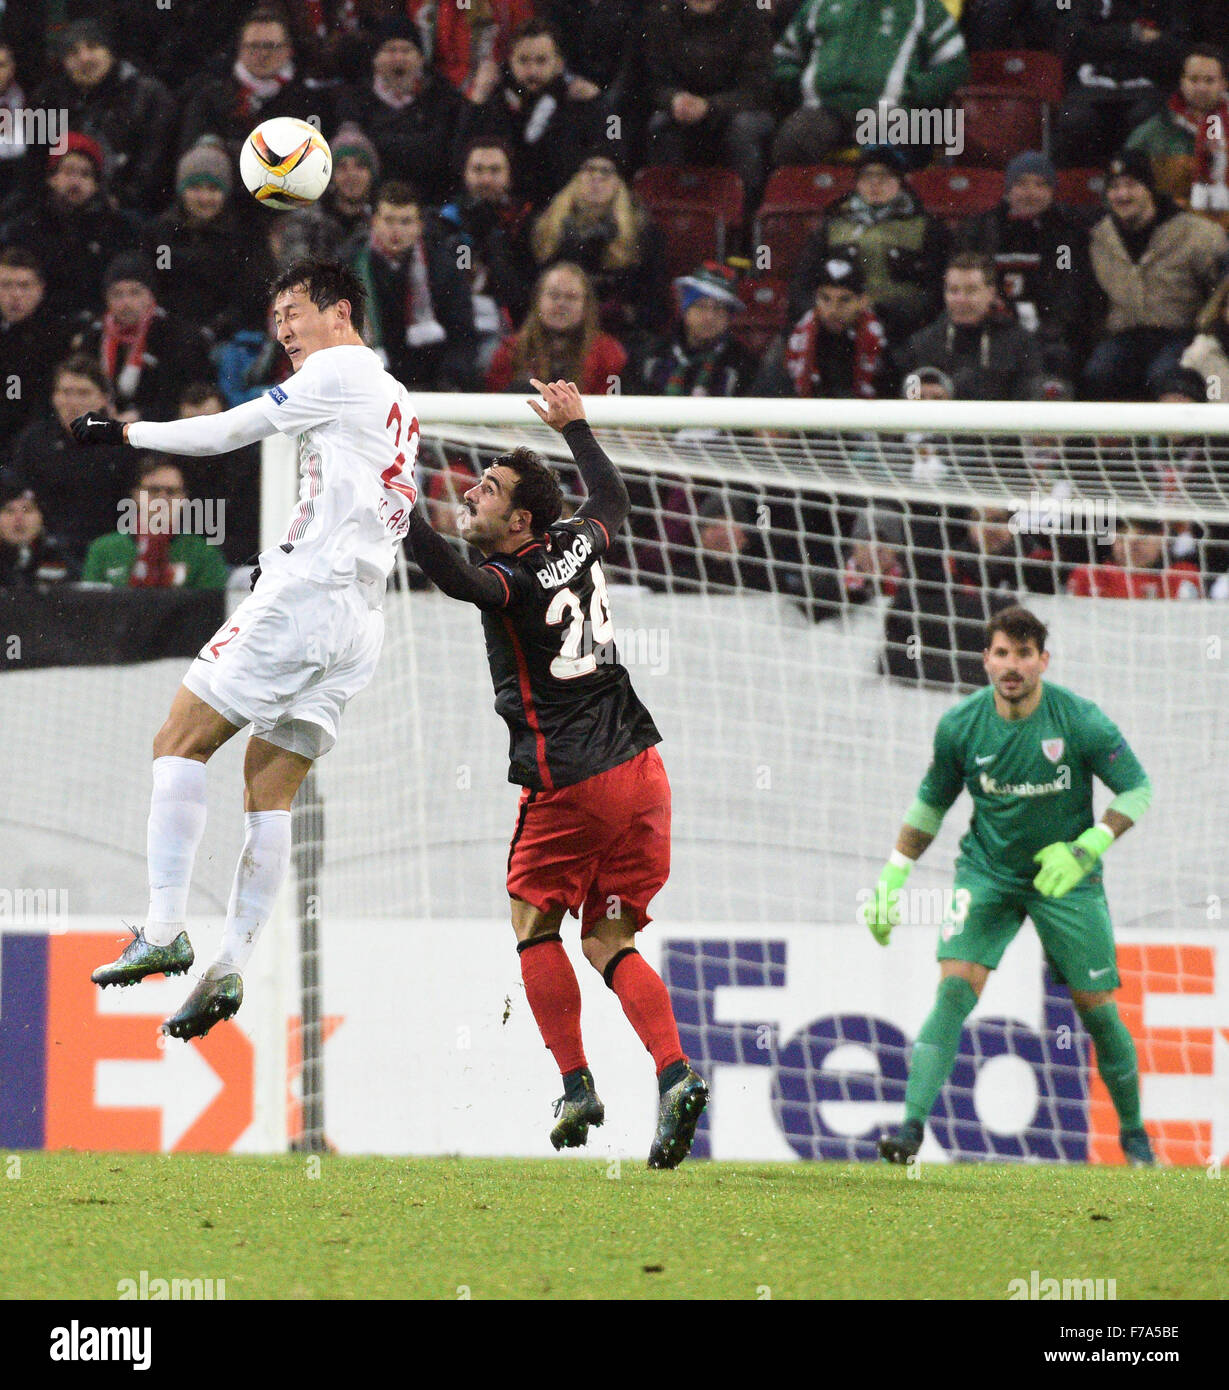 Augsburg, Germany. 26th Nov, 2015. Augsburg's Dong-Won Ji (L) and Bilbao's Mikel Balenziaga (C) vie for the ball in front of Bilbao's goalkeeper Iago Herrerin during the UEFA Europa League Group L soccer match between FC Augsburg and Athletic Bilbao at the Arena Augsburg in Augsburg, Germany, 26 November 2015. Augsburg lost 2-3. Photo: STEFAN PUCHNER/dpa/Alamy Live News Stock Photo